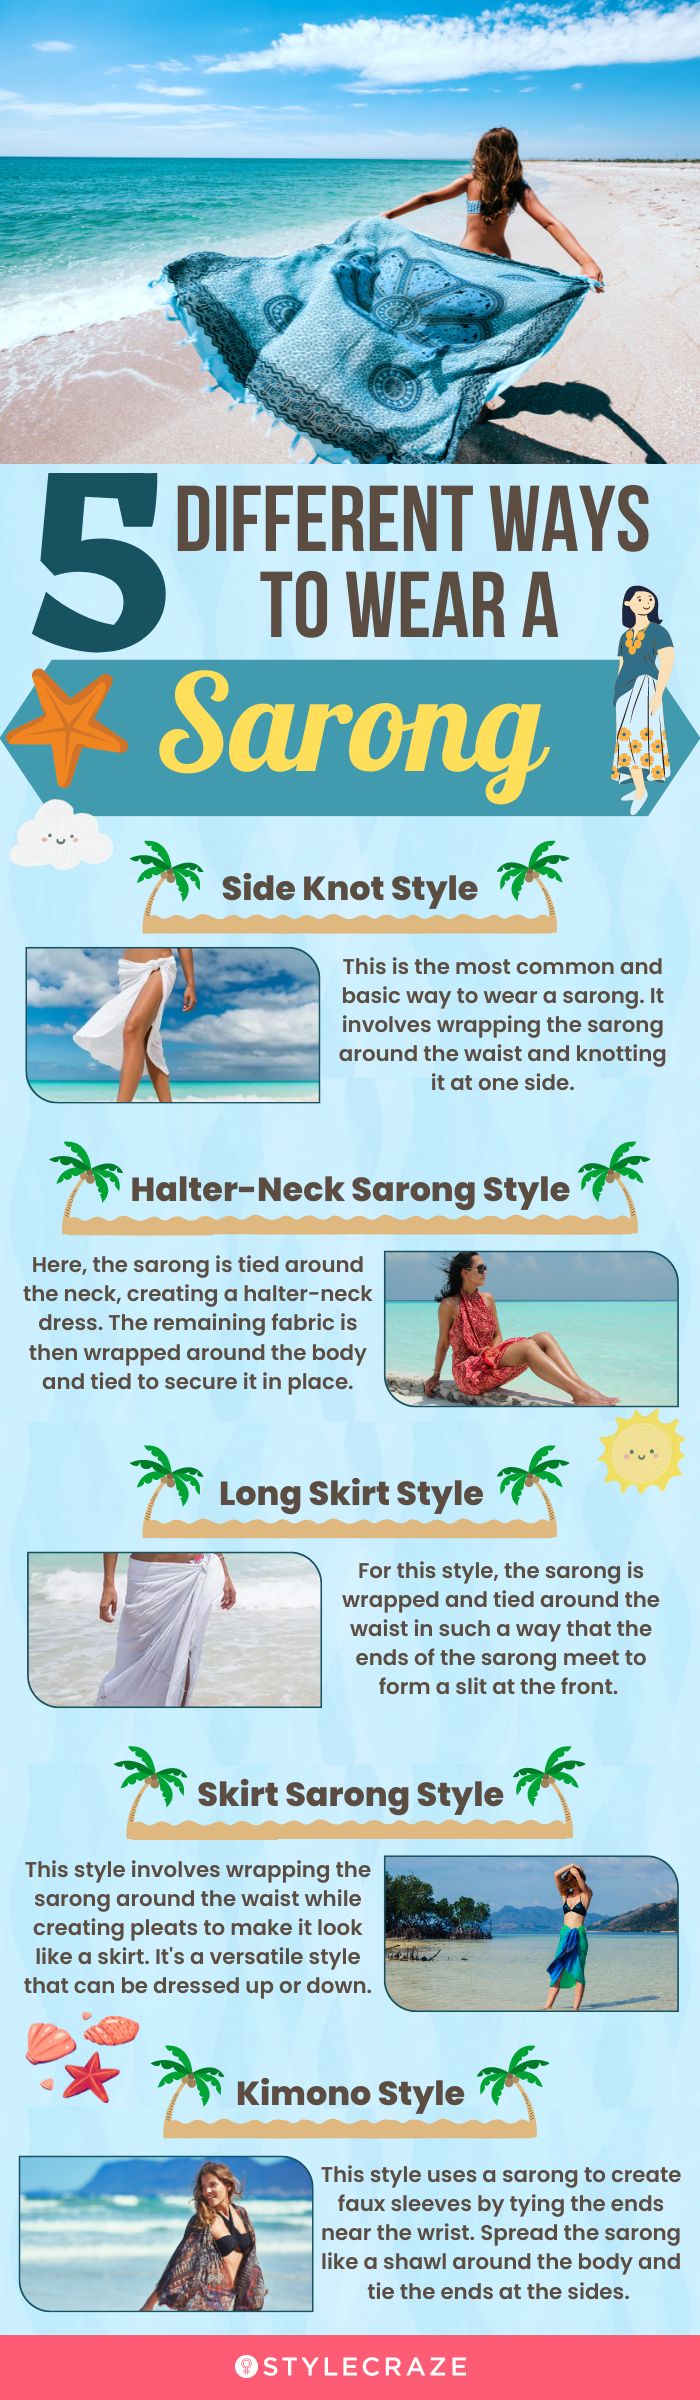 5 different ways to wear a sarong(infographic)